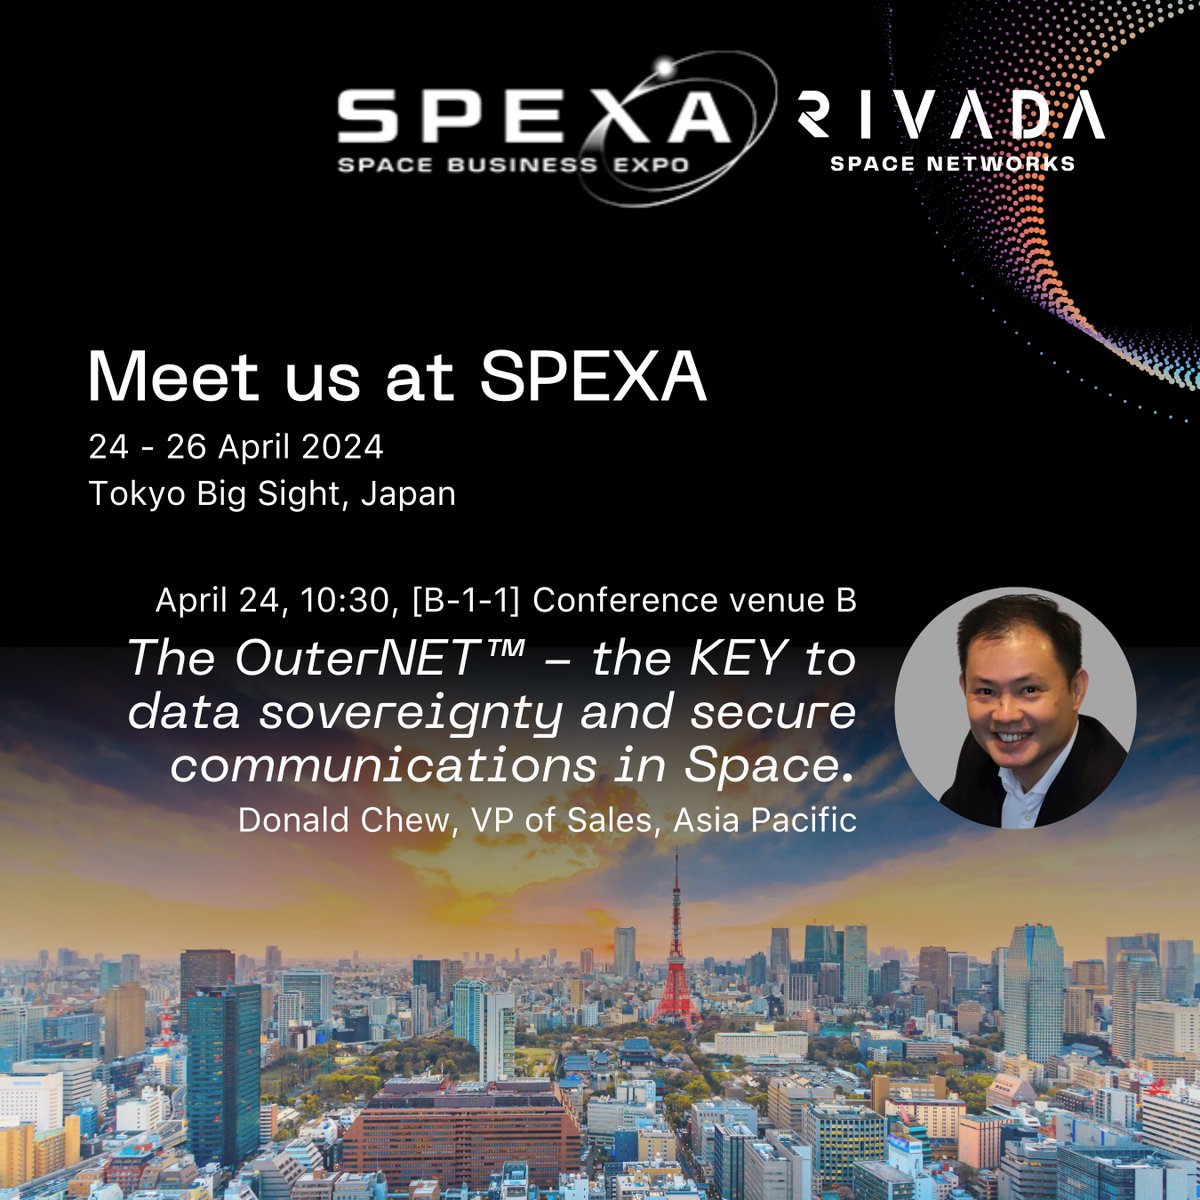 Meet us at @SPEXAJapan! We're thrilled to announce that Donald Chew, our VP of Sales, Asia Pacific, will give insights about the #OuterNET™ and why it is the key to data sovereignty and secure communications in space at SPEXA. #SPEXA #securecommunications #datasovereignty